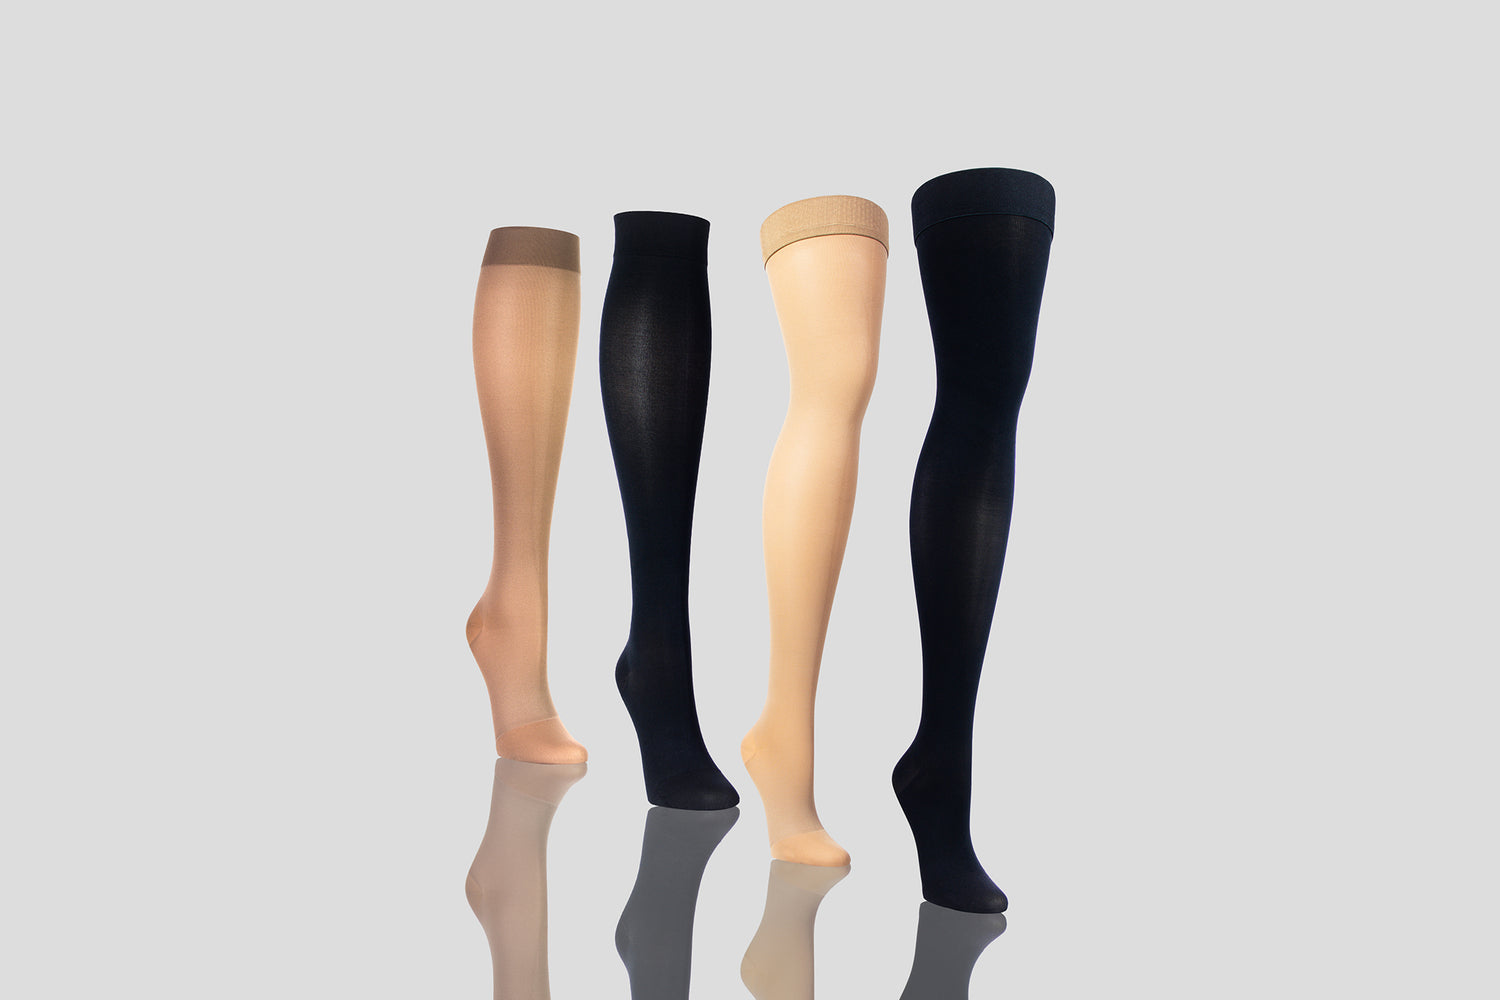 Image Showing 2 Knee High and 2 Thigh High Compression Socks - Both in Beige and Black - Light Grey Background With Shadow